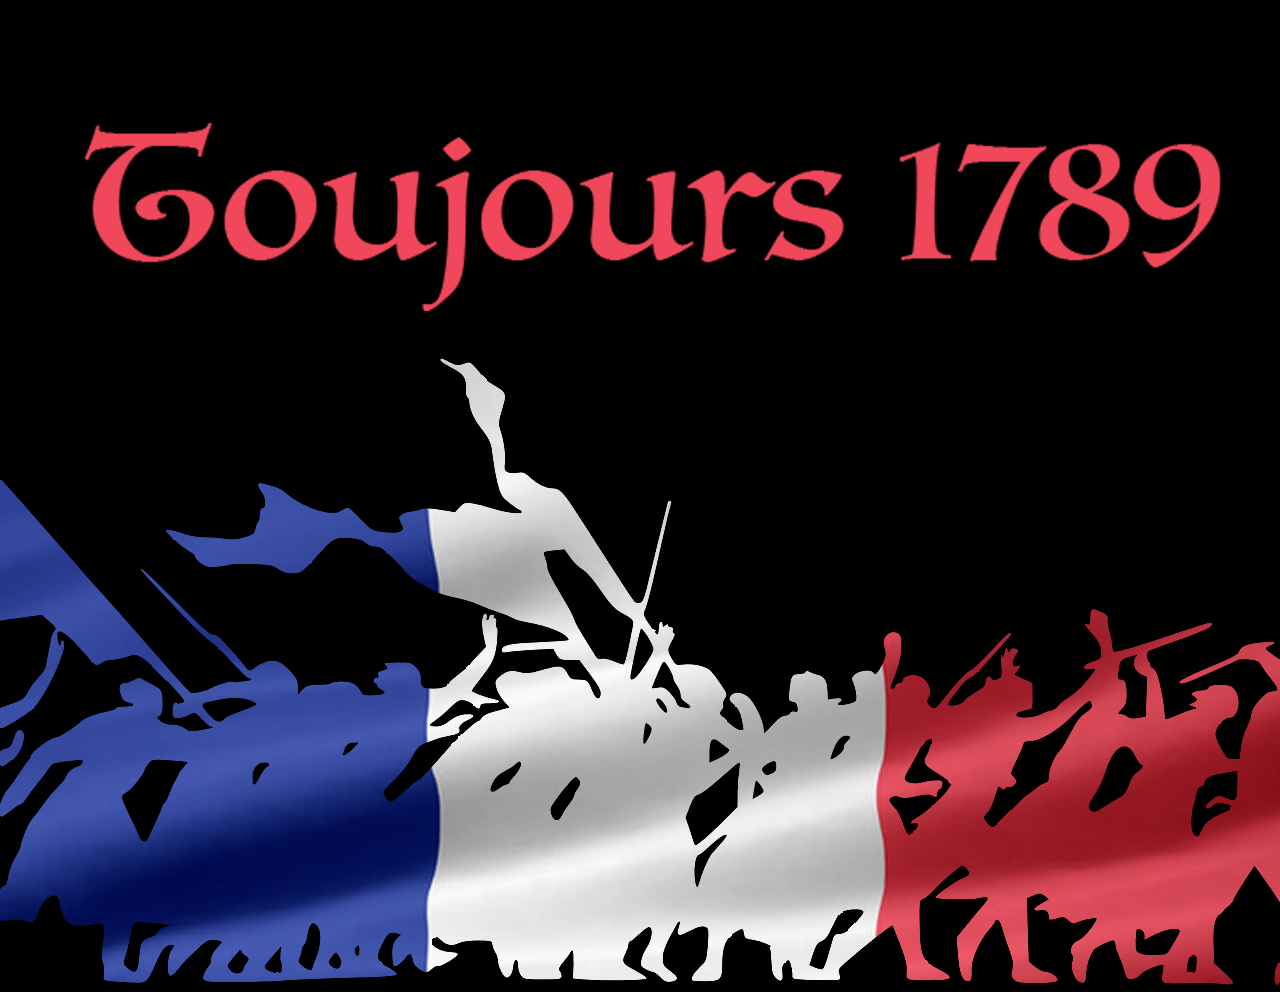 Toujours 1789 - a play in French